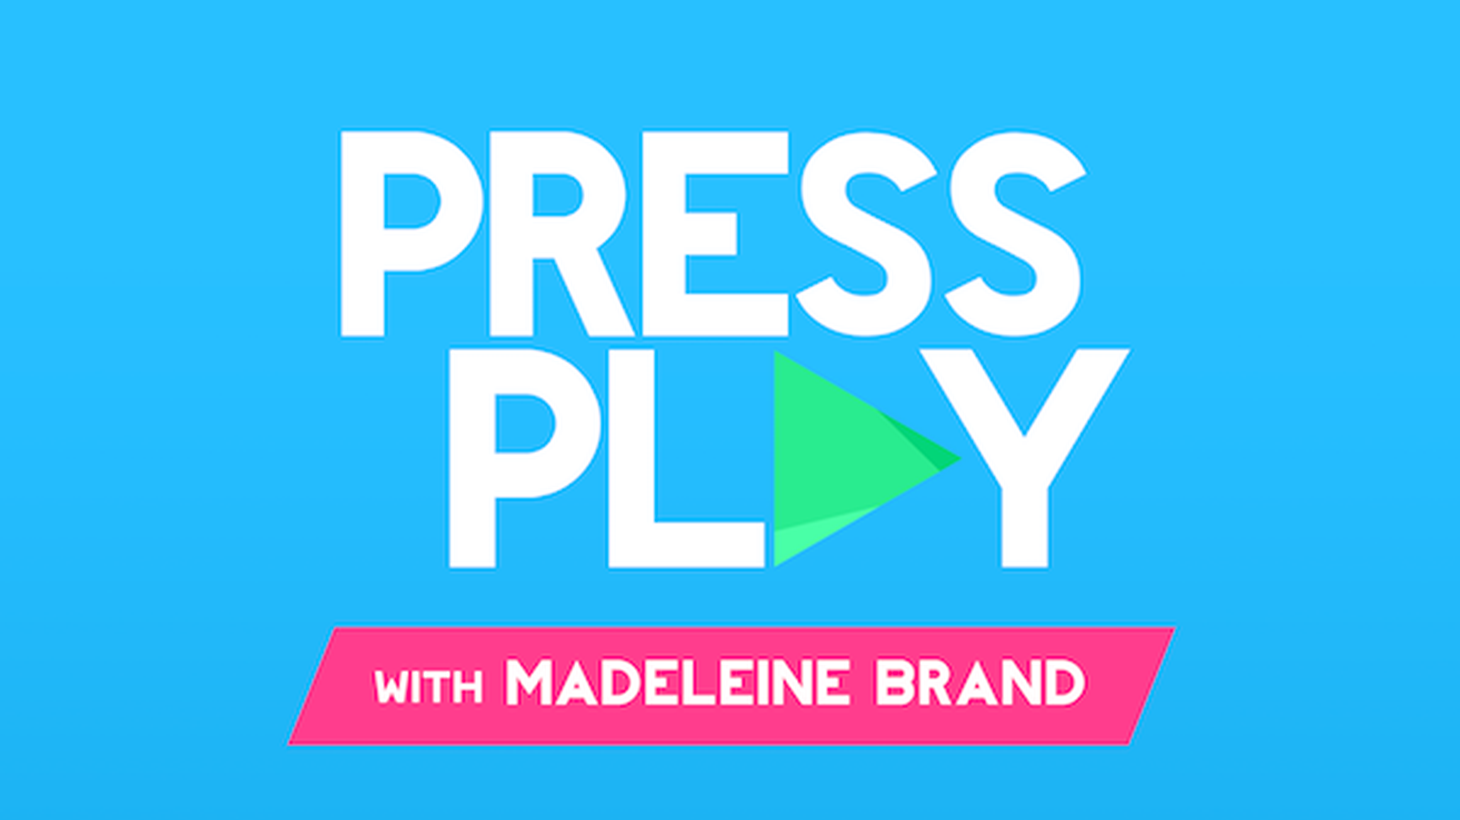 Today on Press Play: Facebook acquires WhatsApp, the "dark power of fraternities," income inequality, flu vaccine myths, and an update on the Culver Ice Arena.